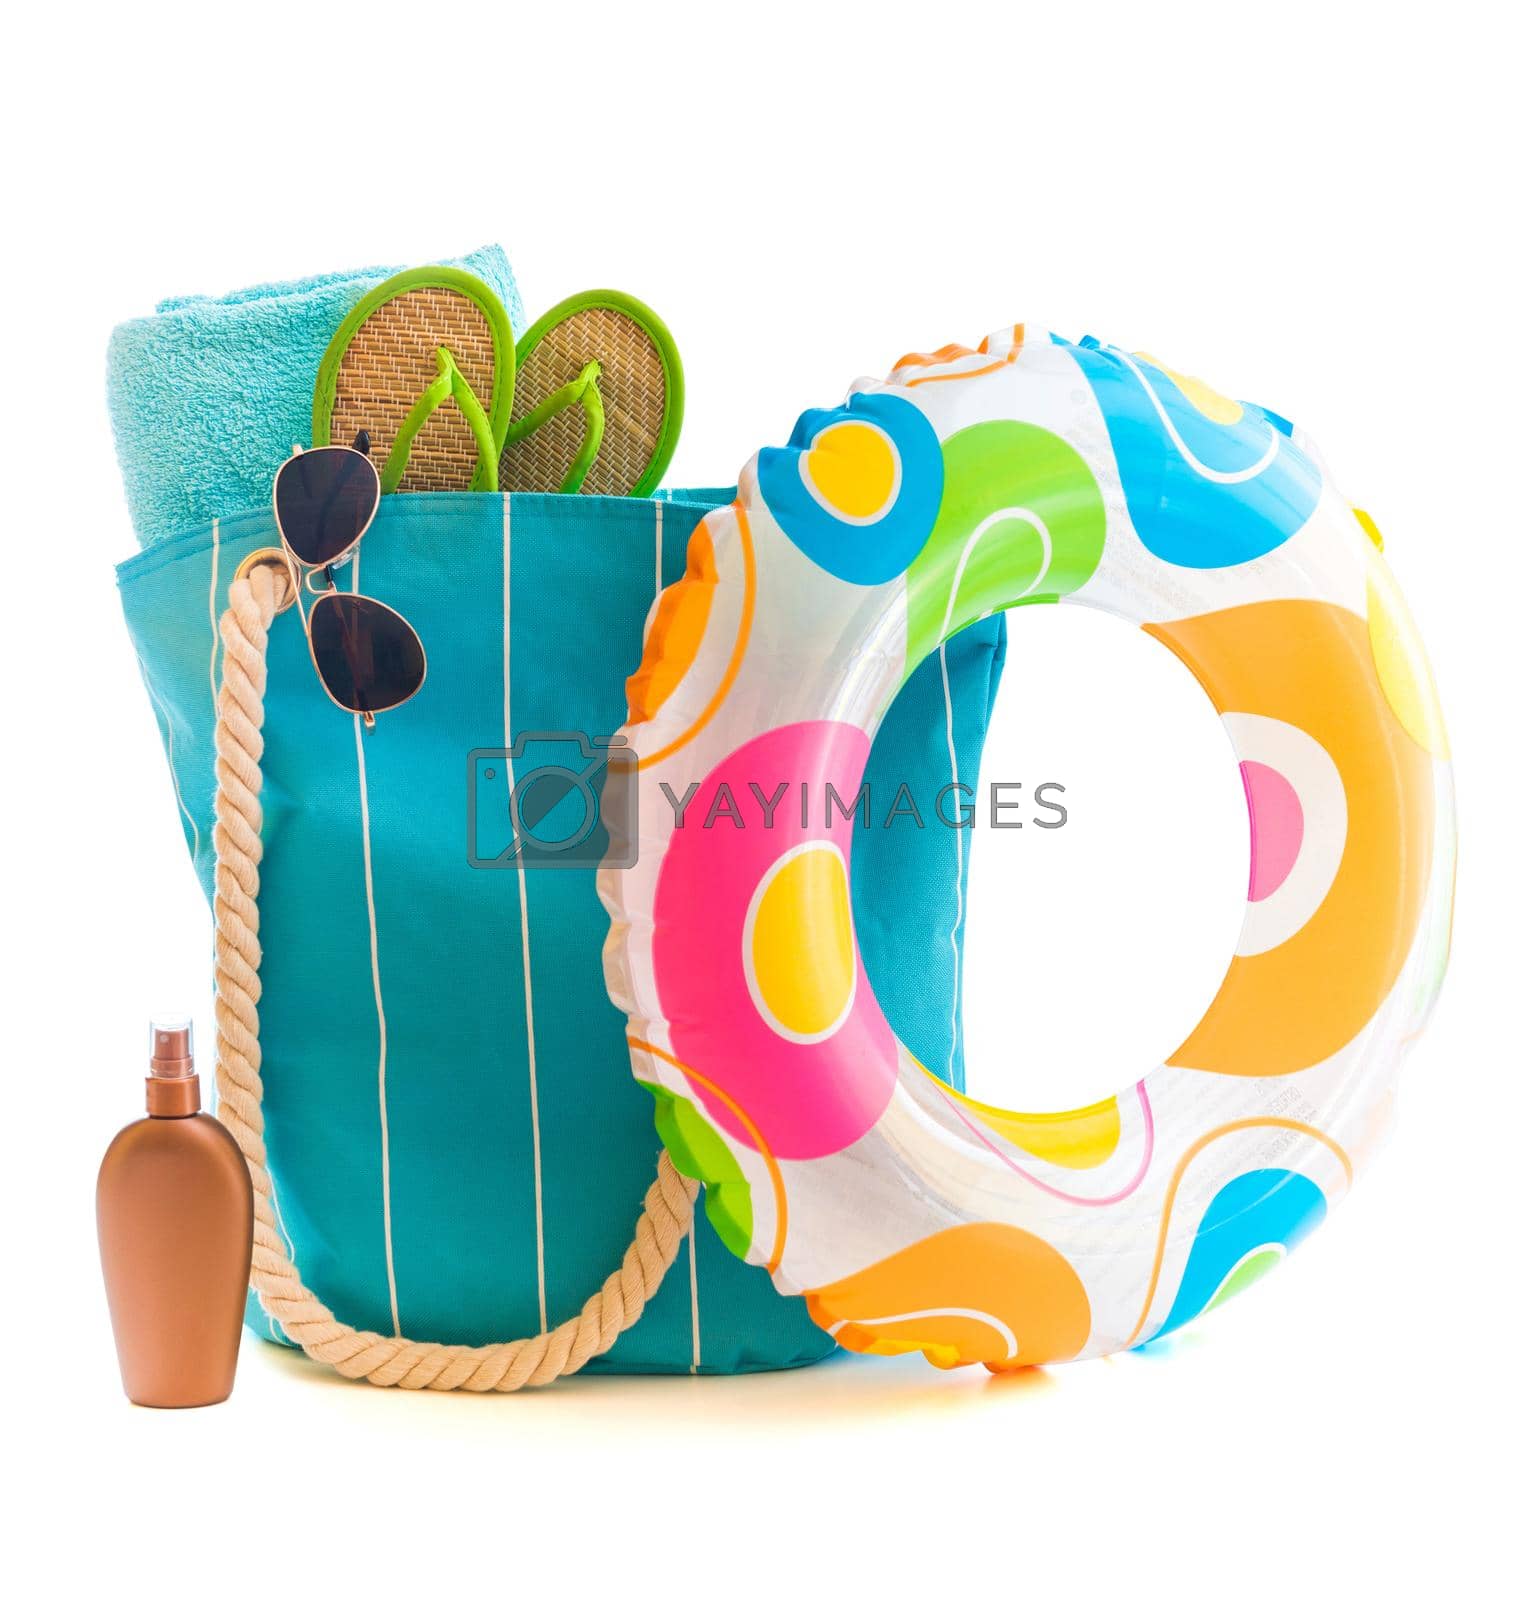 Royalty free image of beach accessories by tan4ikk1